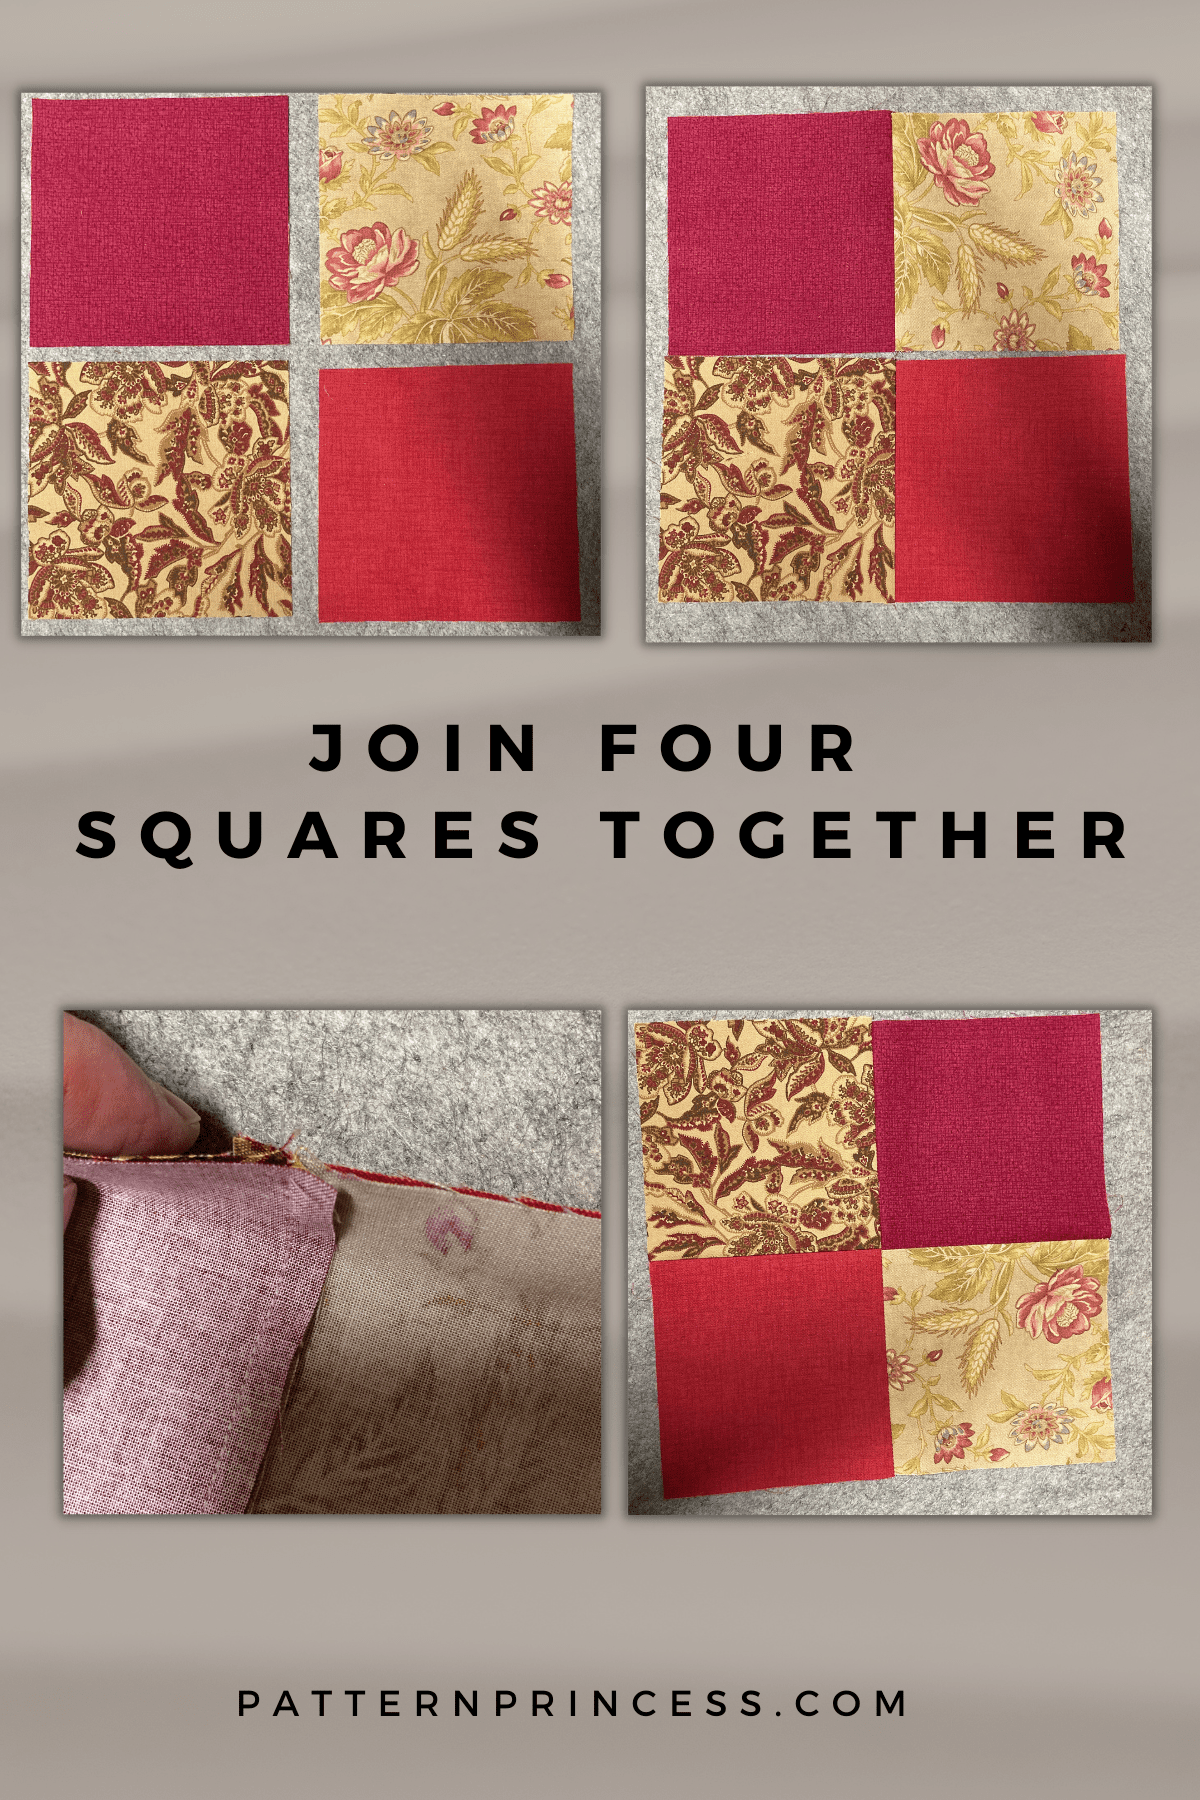 Join Four Squares Together